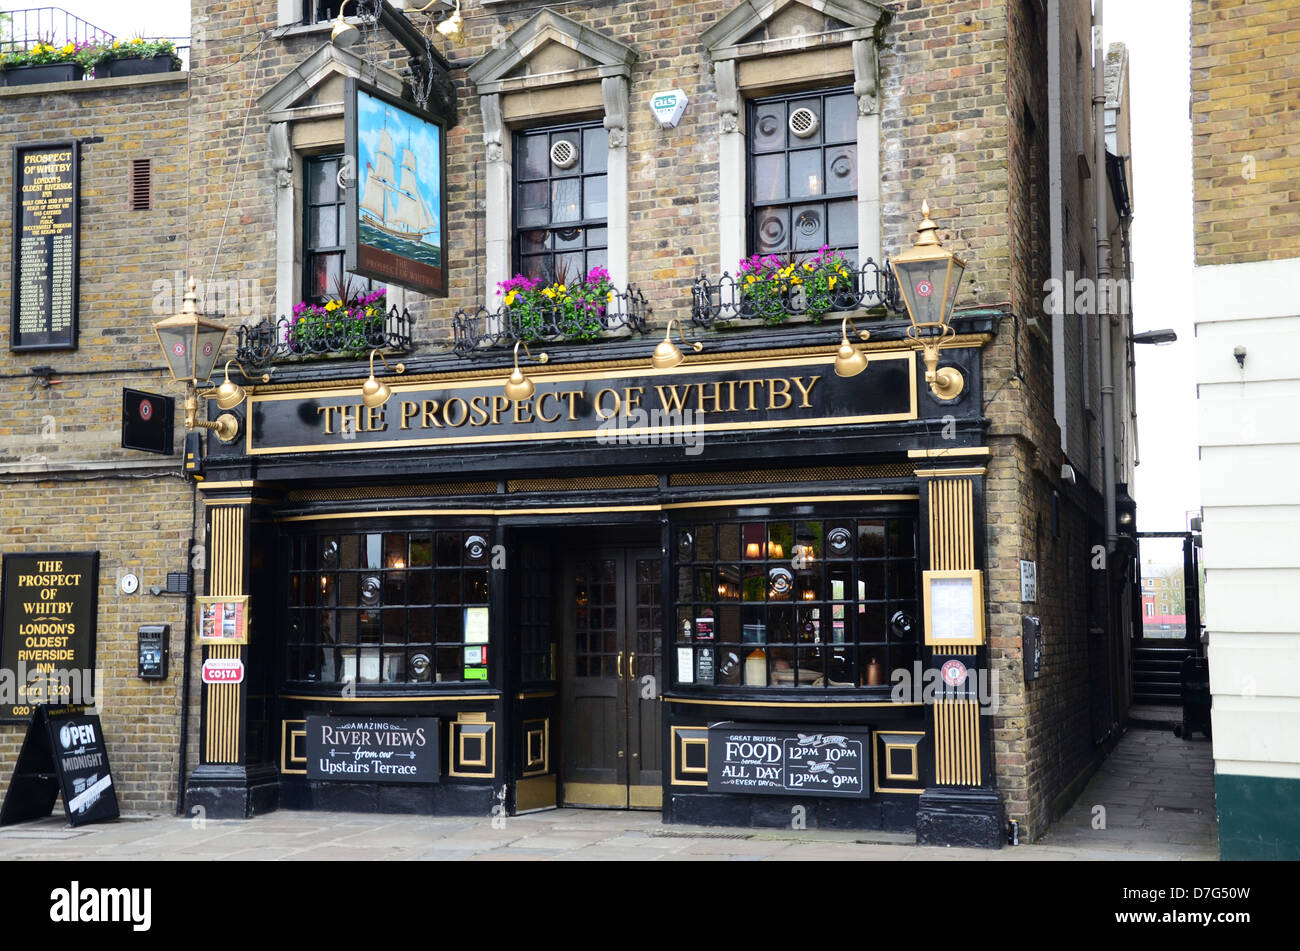 Der Prospect of Whitby Pub, Wapping Wand, Wapping, London Stockfoto